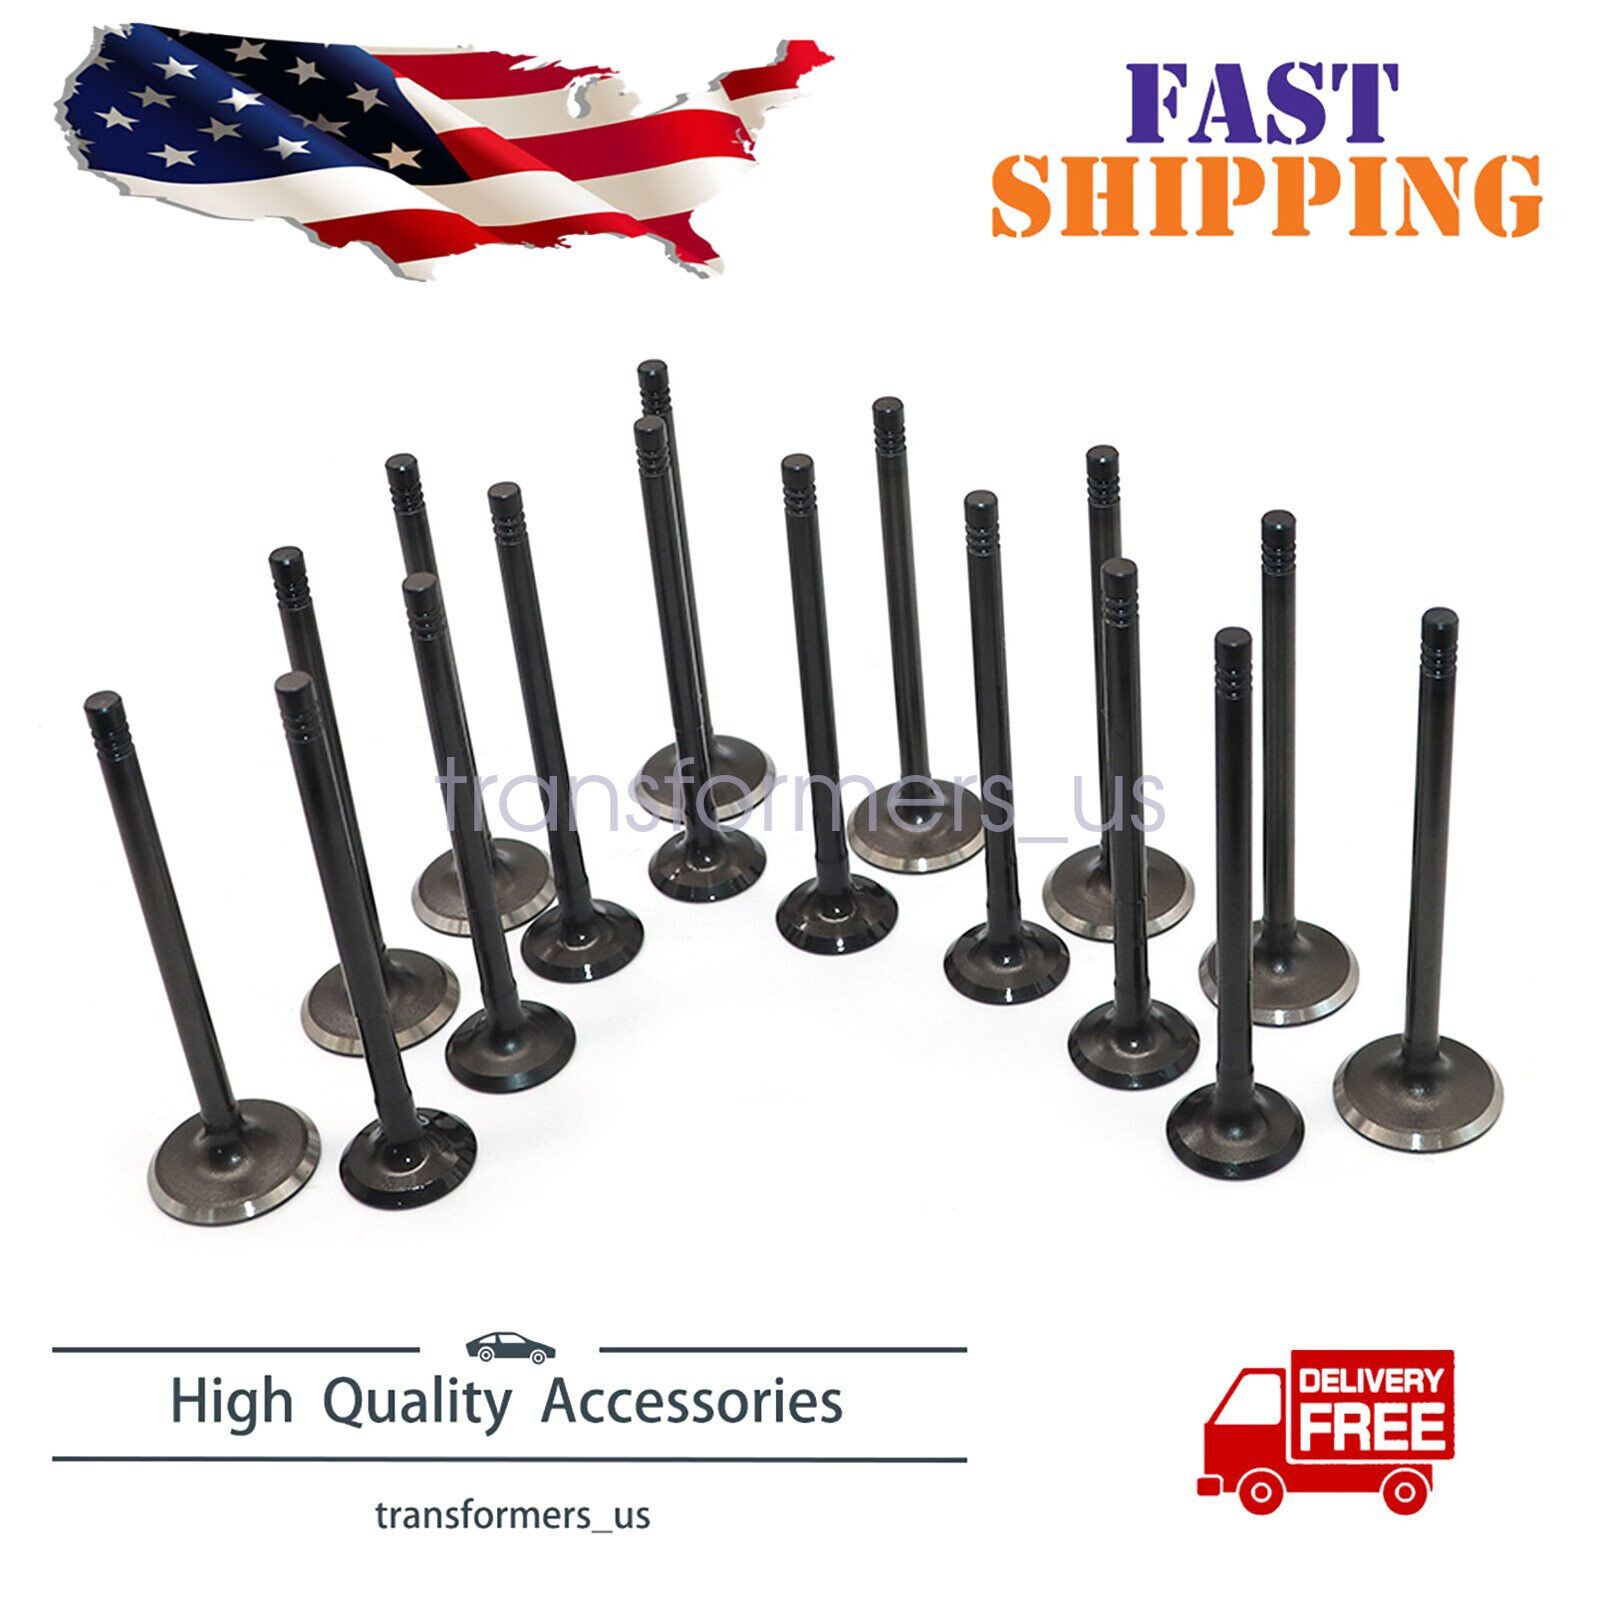 NEW Exhaust Intake Valve Kit Fits For 2011-2017 Ford Fiesta L4 1.6L DOHC 16V